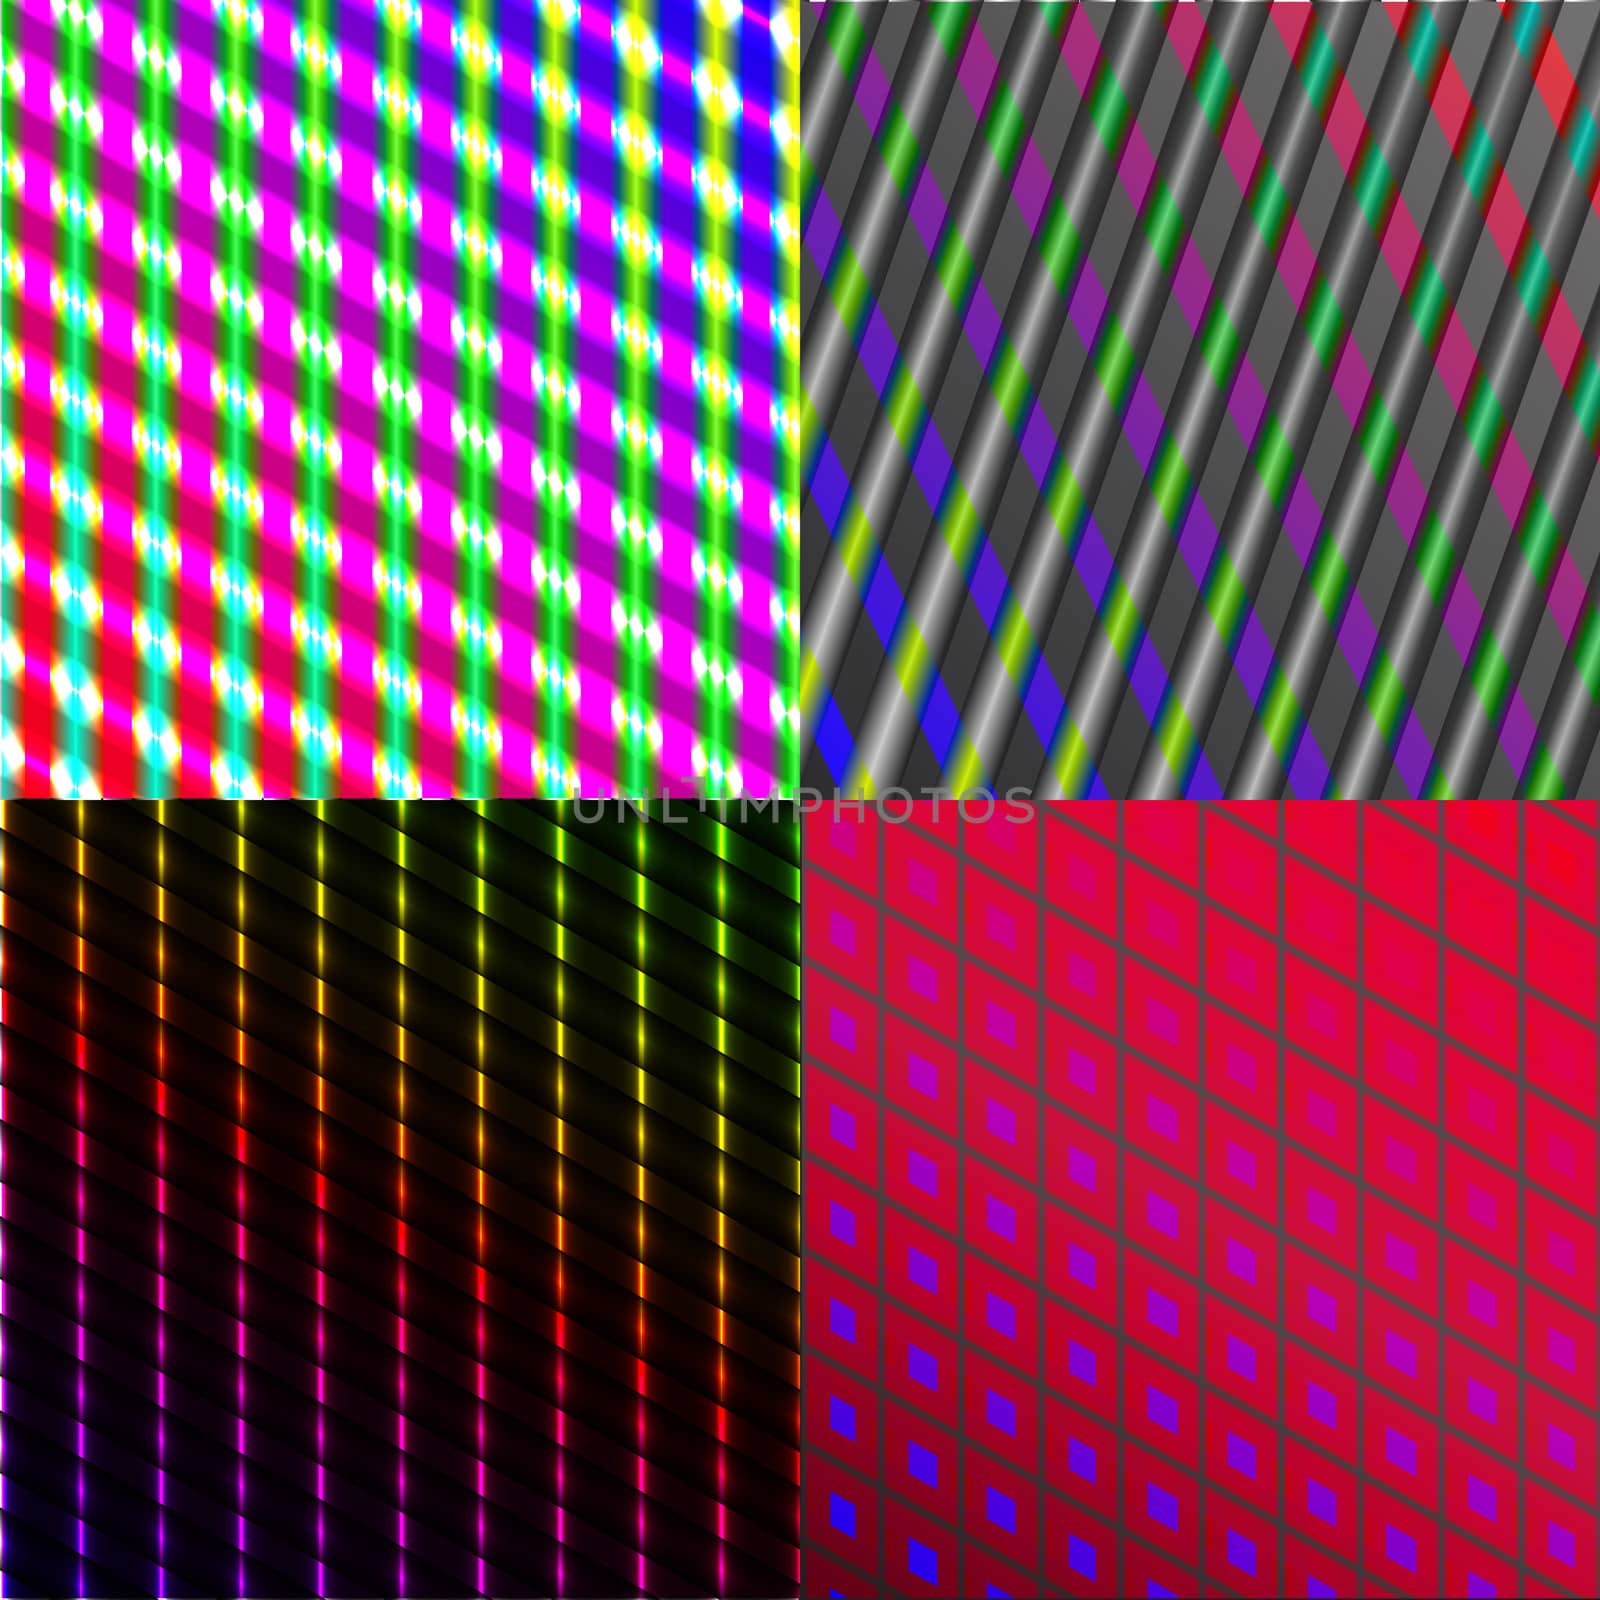 Set of 4 colorful abstract neon backgrounds. Rasterized copy.